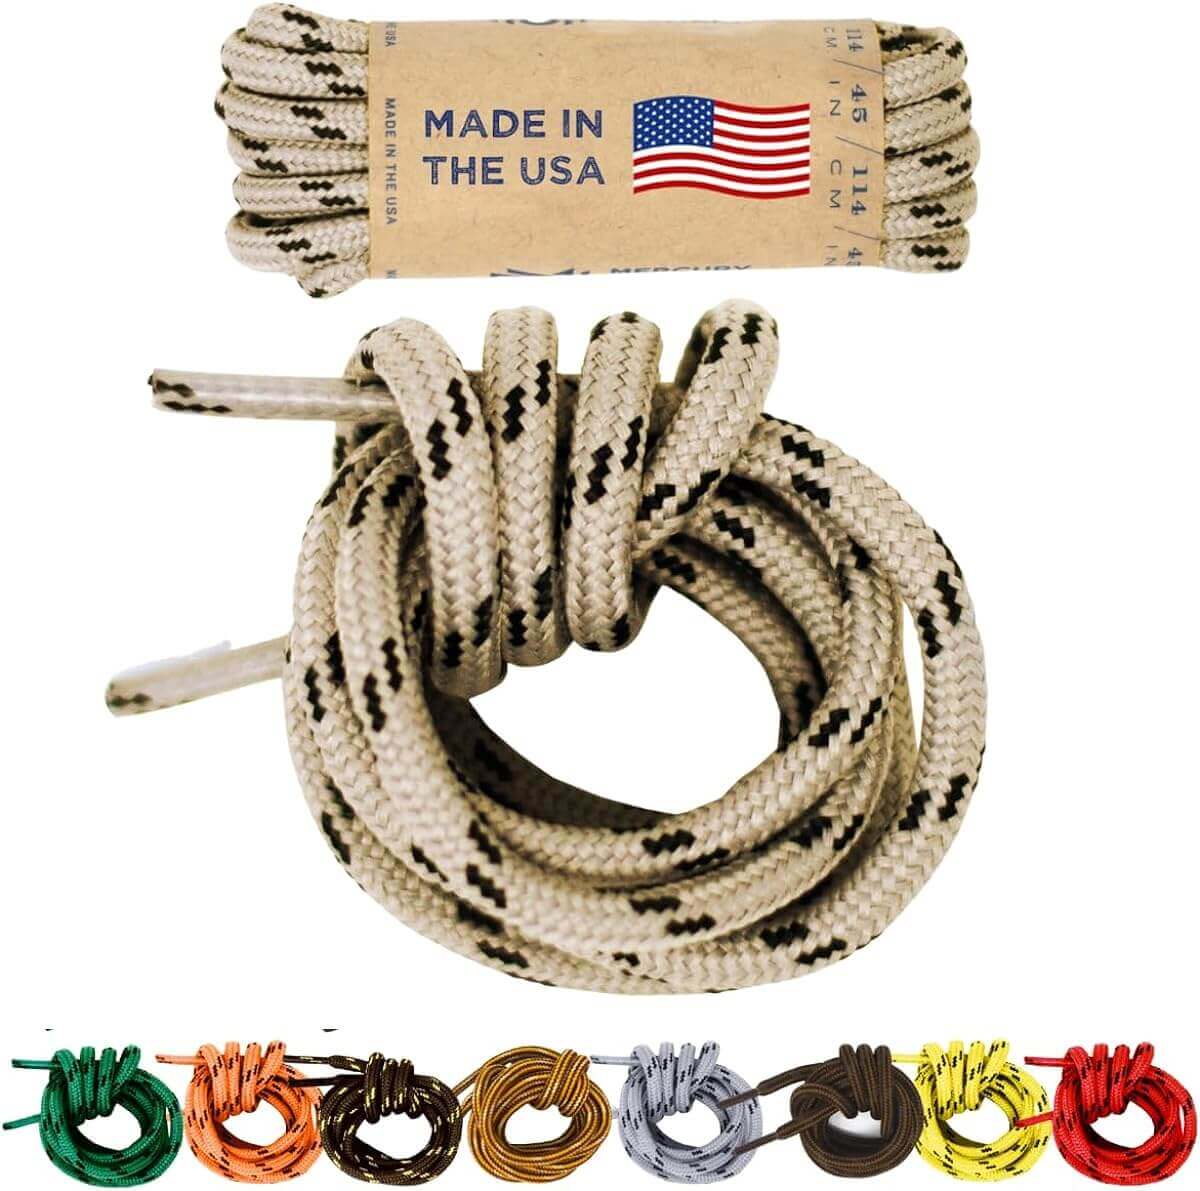 Shop The Latest >Honey Badger Boot Laces Heavy Duty w/Kevlar - Made in USA > *Only $20.24*> From The Top Brand > *Honey Badgerl* > Shop Now and Get Free Shipping On Orders Over $45.00 >*Shop Earth Foot*